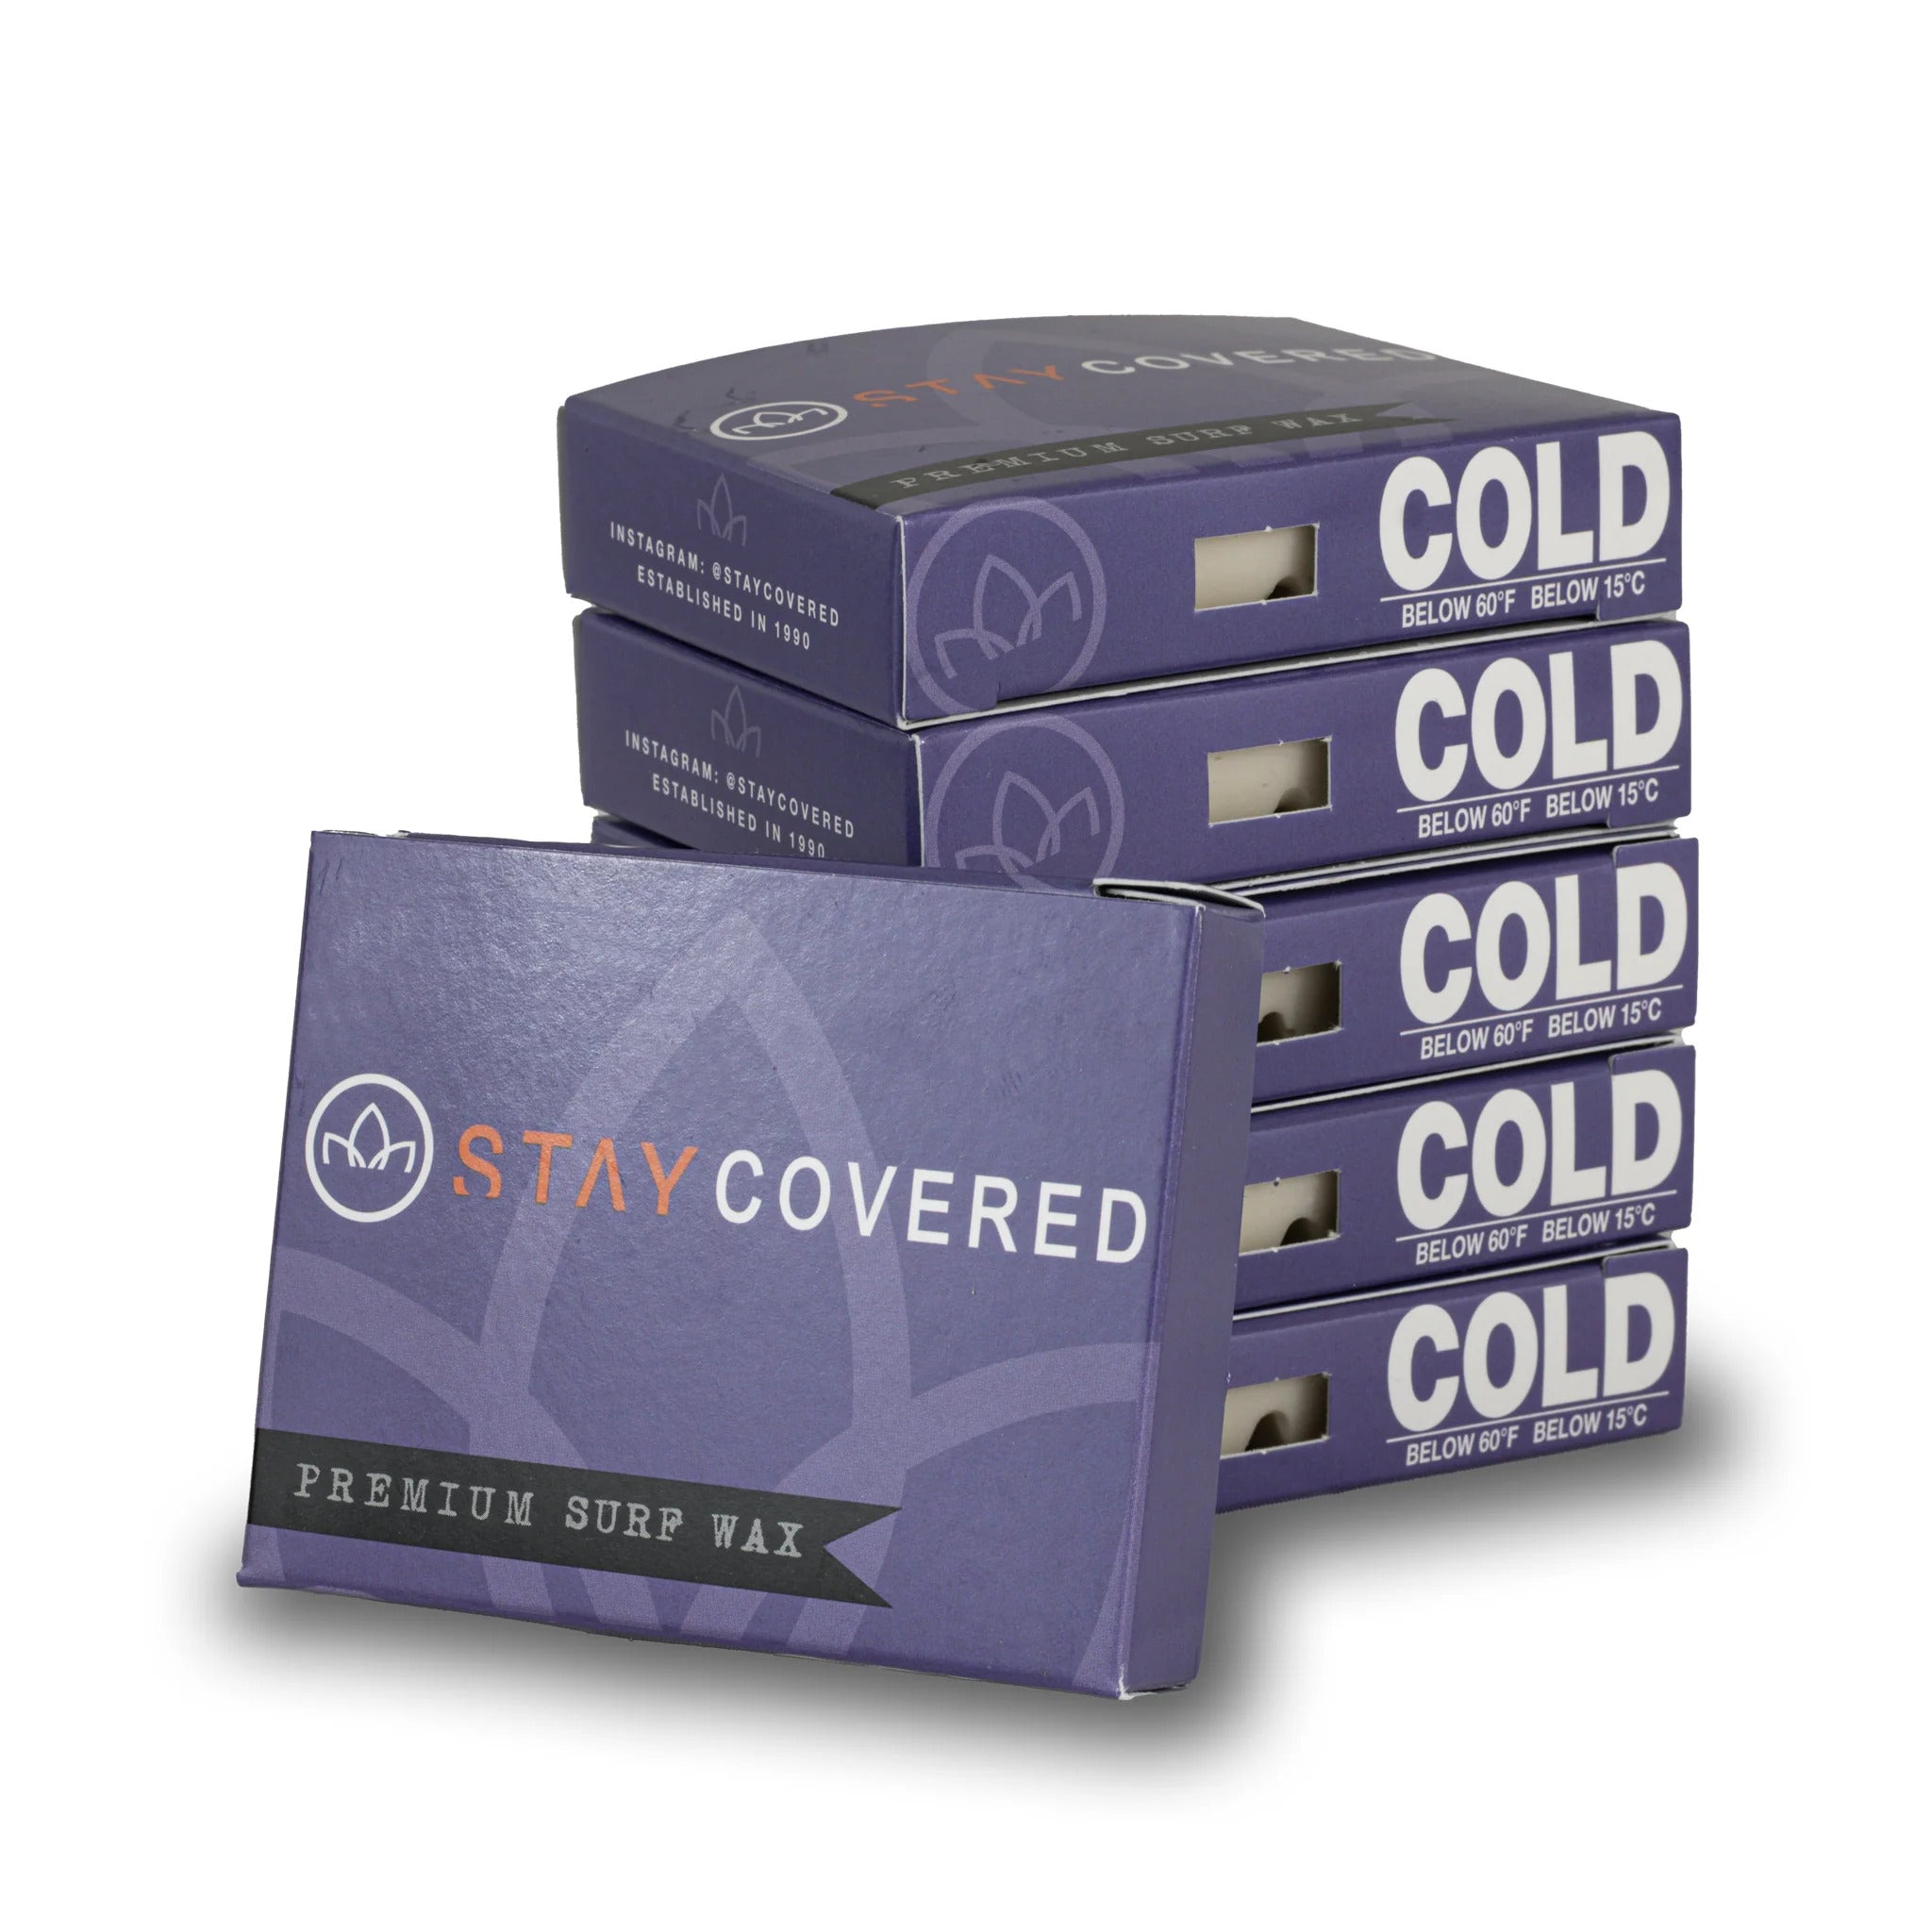 STAY COVERED - Organic Surf Wax - COLD